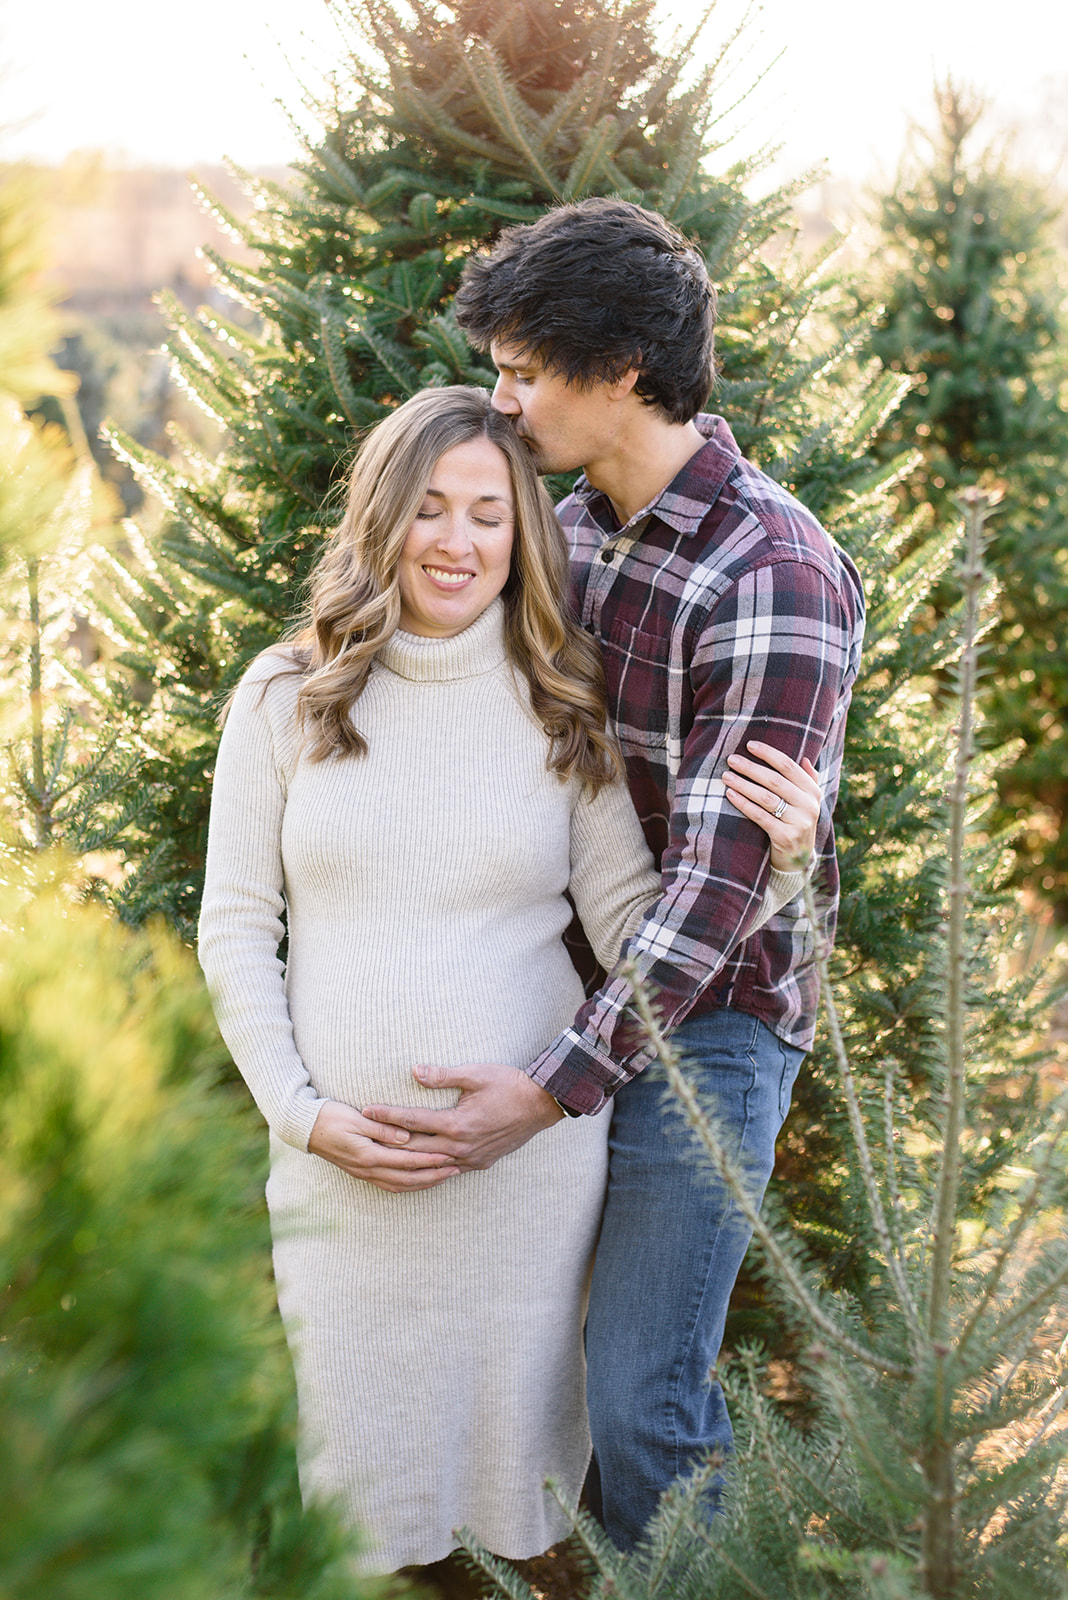 Soon-to-be parents snuggle in the Christmas trees during their maternity photoshoot with Rachel Mummert Photography